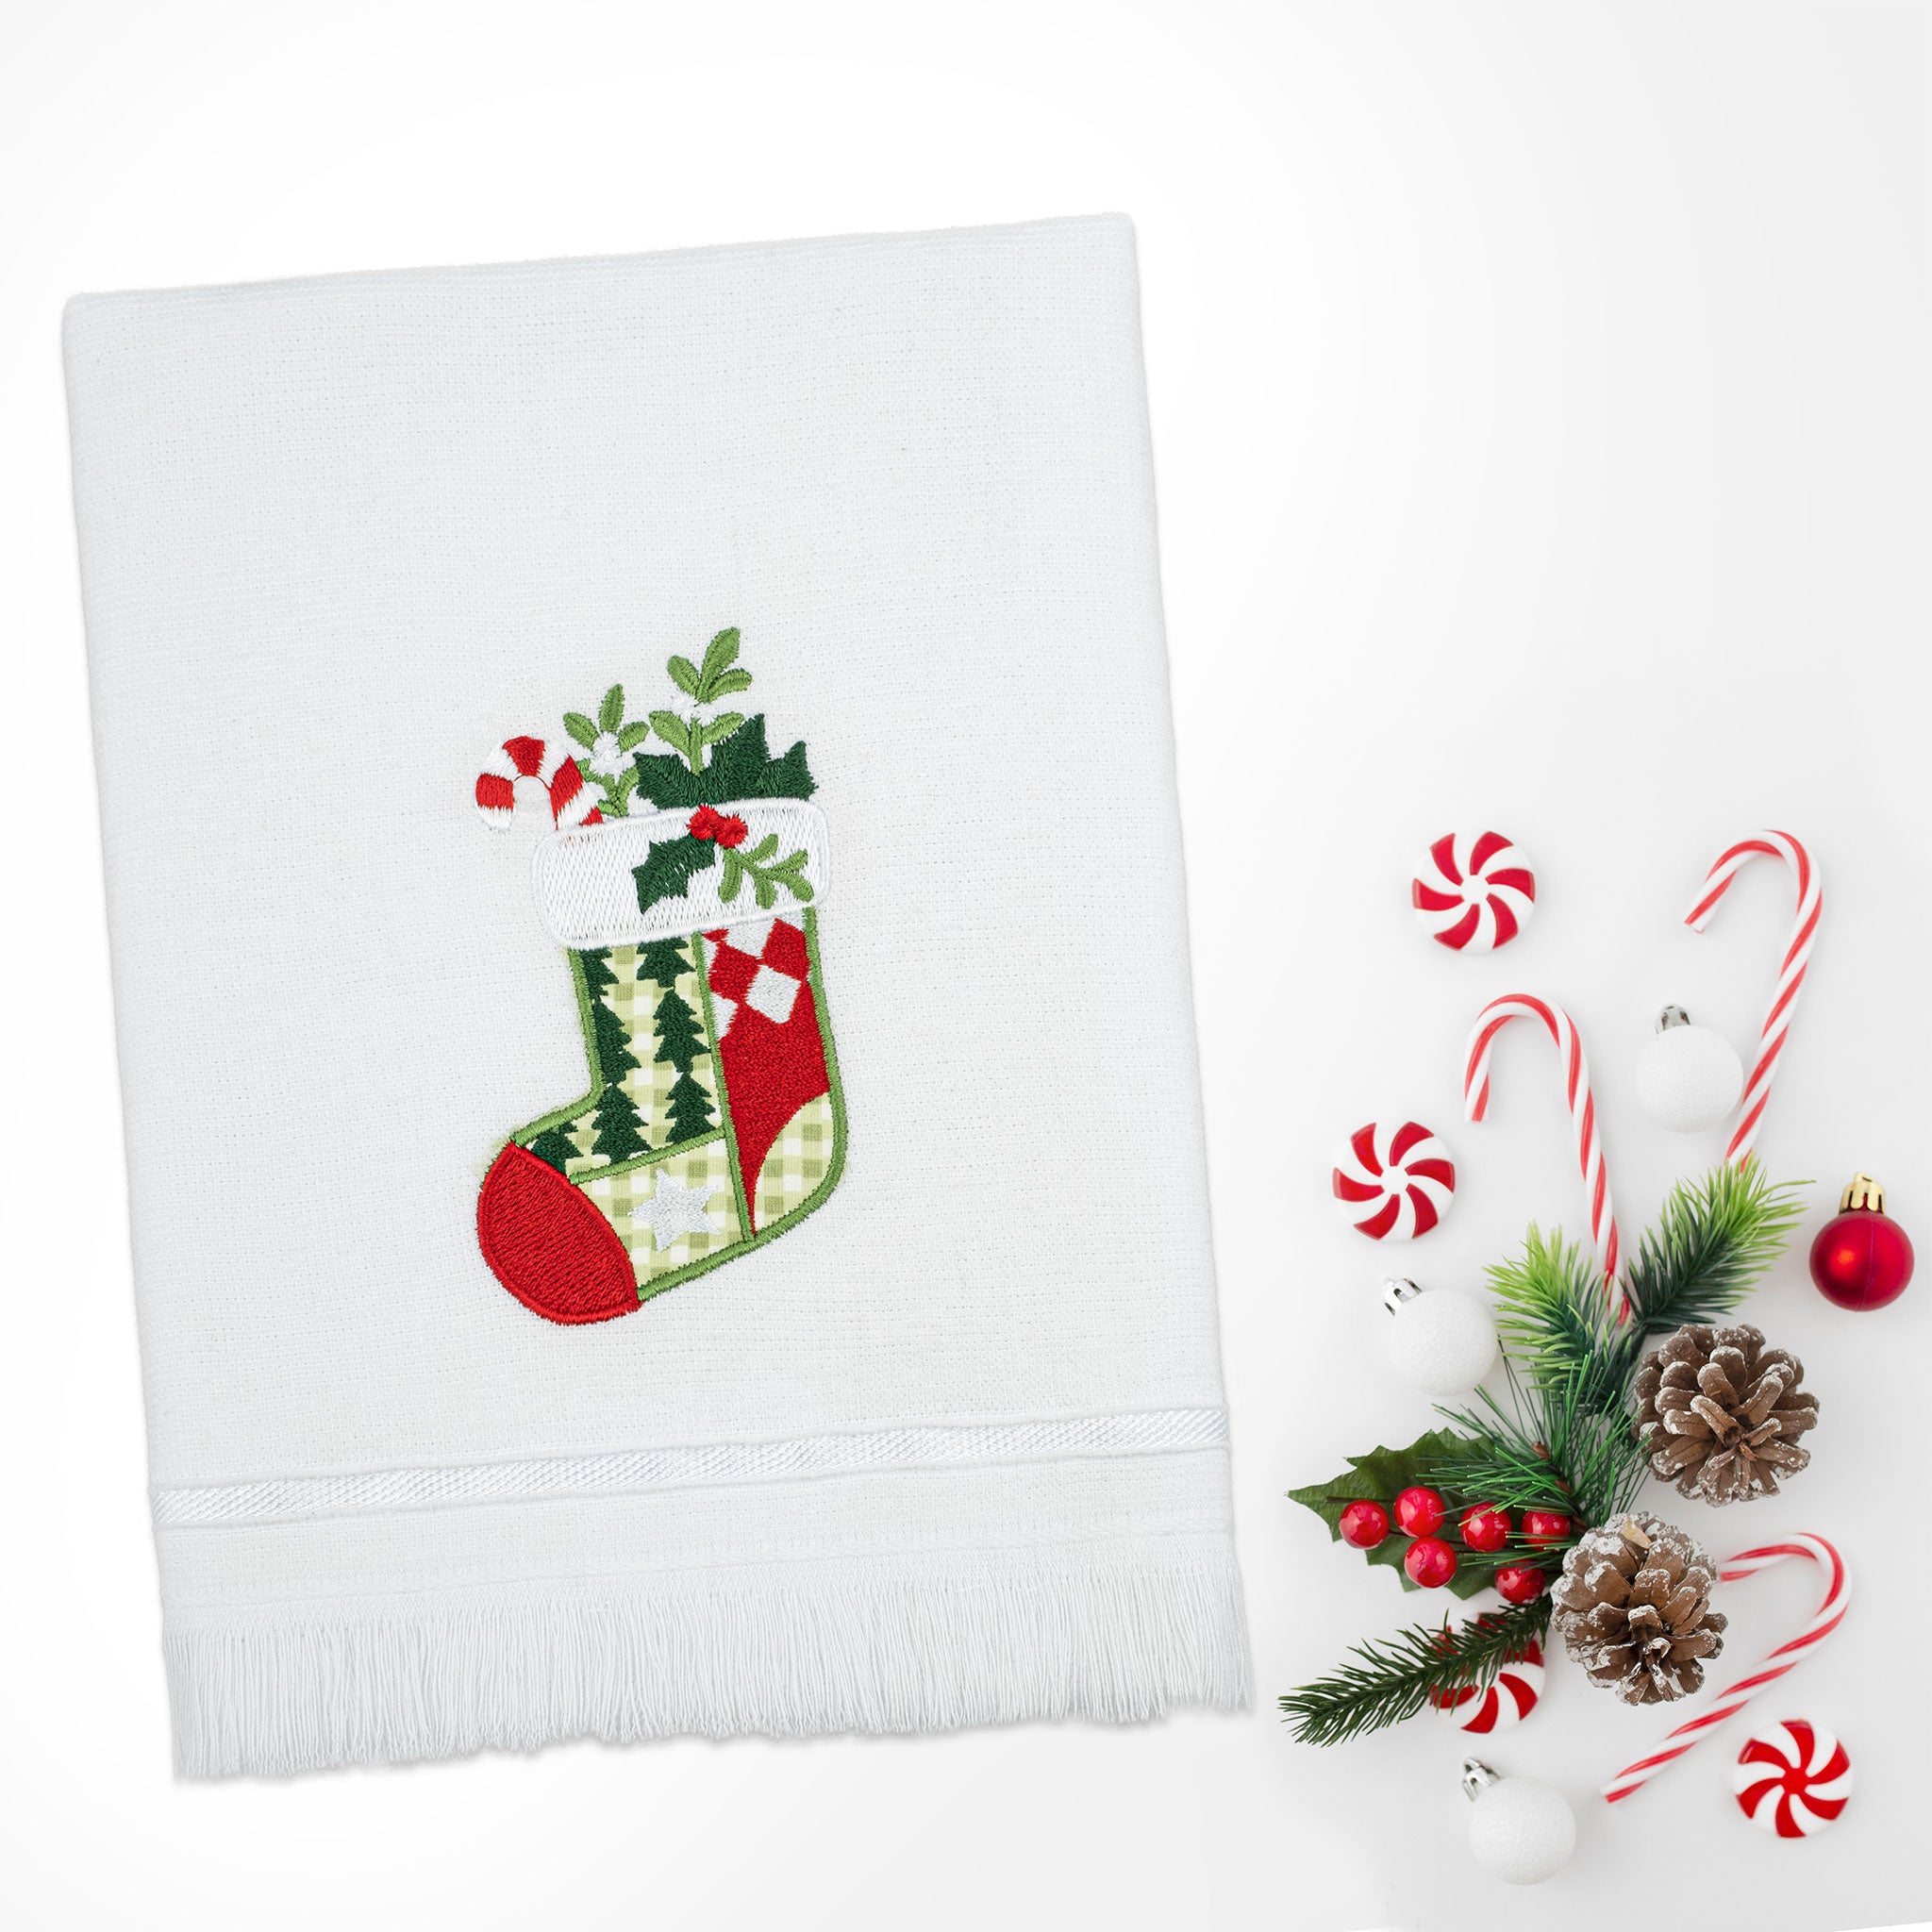  American Soft Linen - Christmas Towels Set 2 Packed Embroidered Turkish Cotton Hand Towels - Christmas Tree Socks - 7